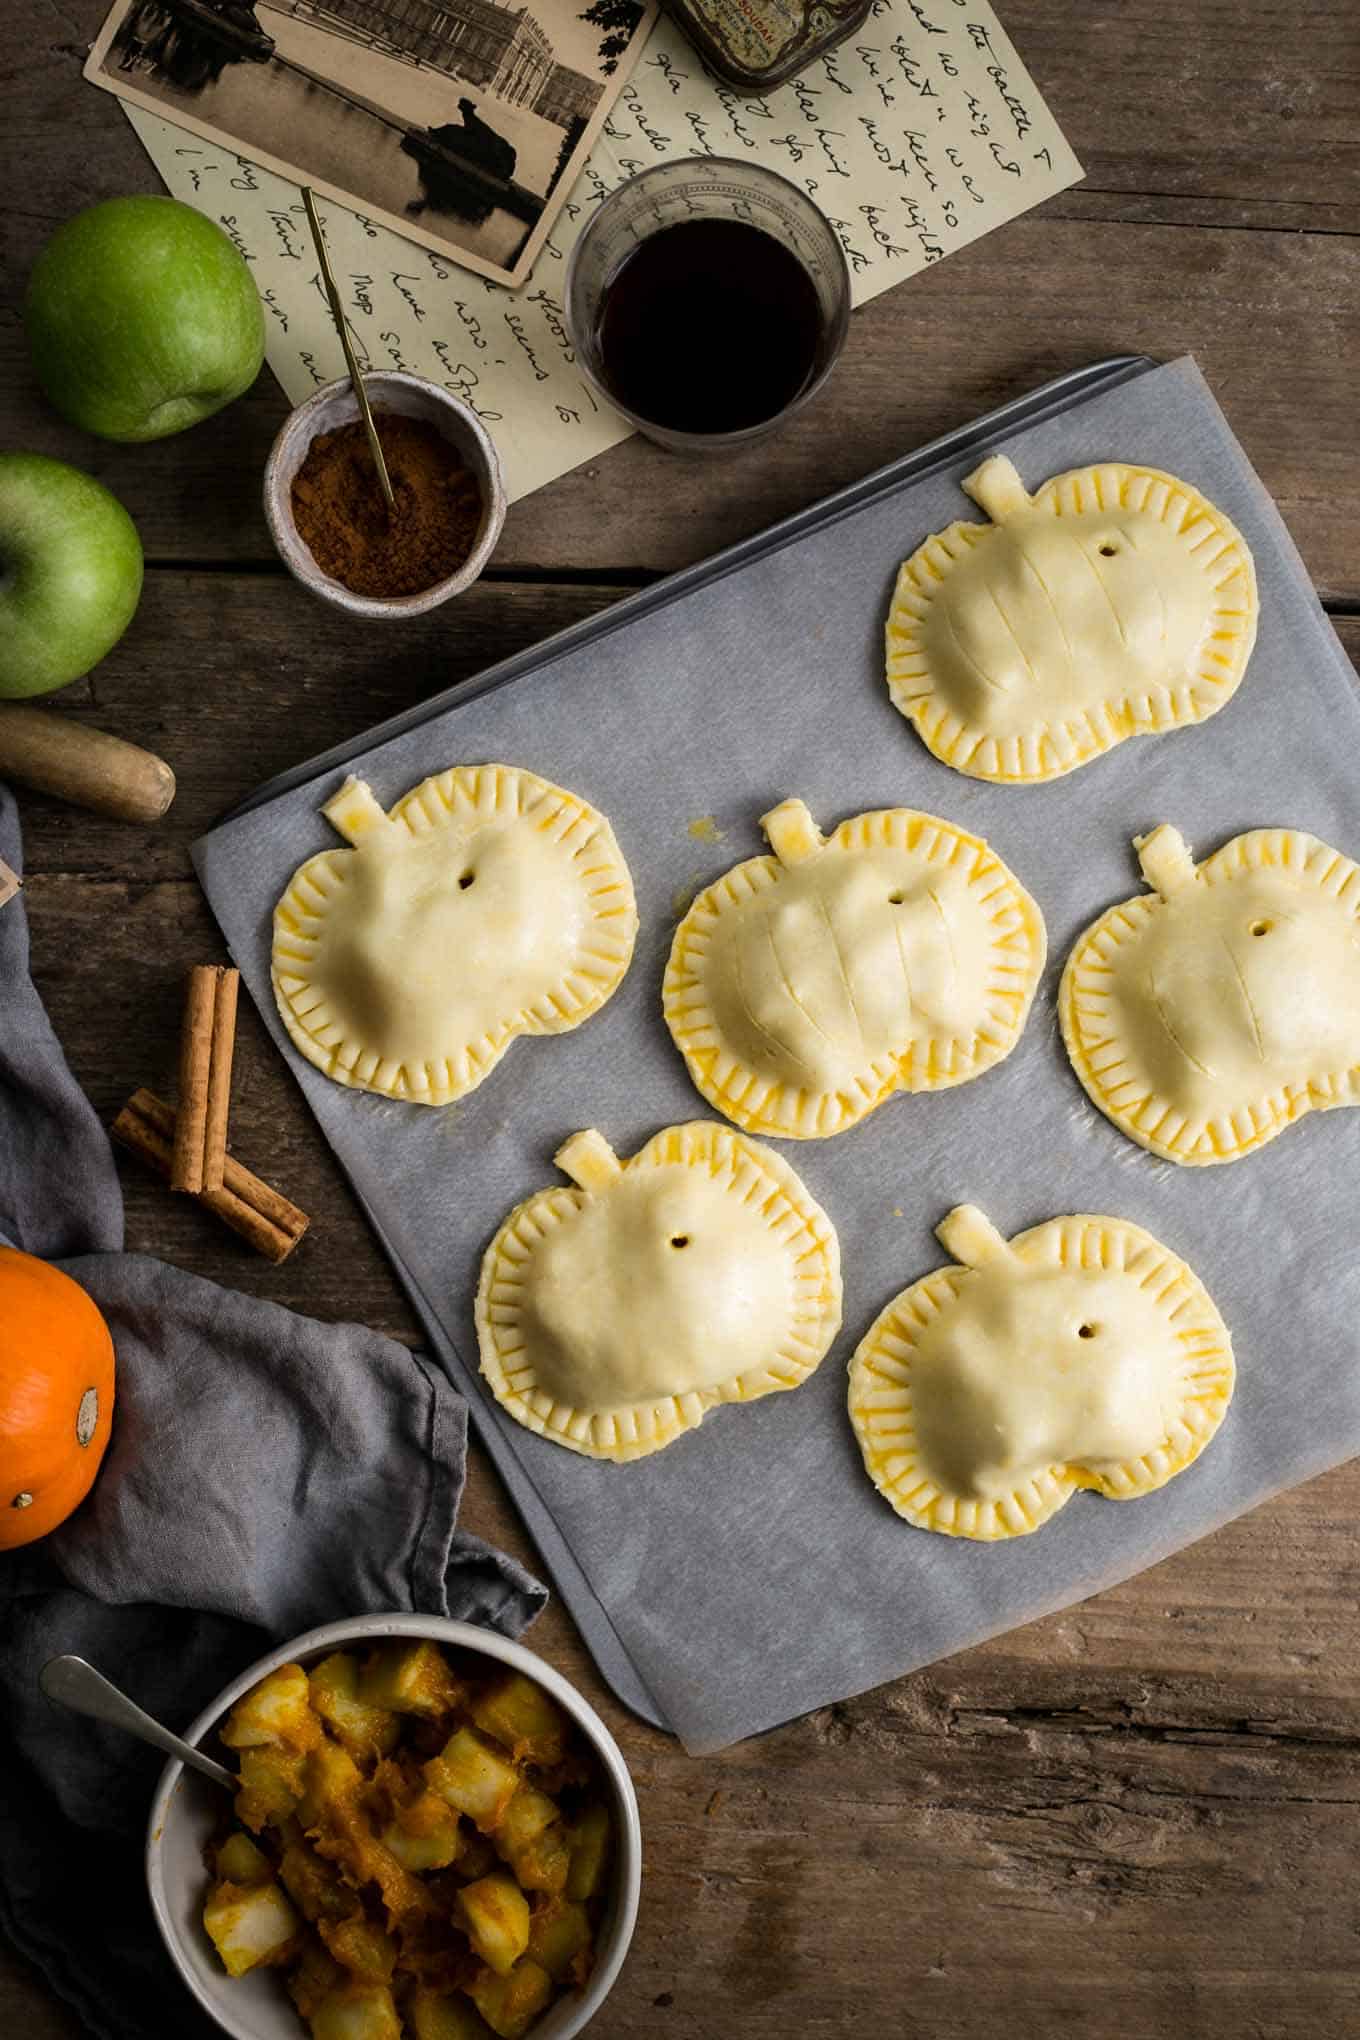 Easy and delicious recipe for spiced apple and #pumpkin hand pies #vegan | via @annabanana.co